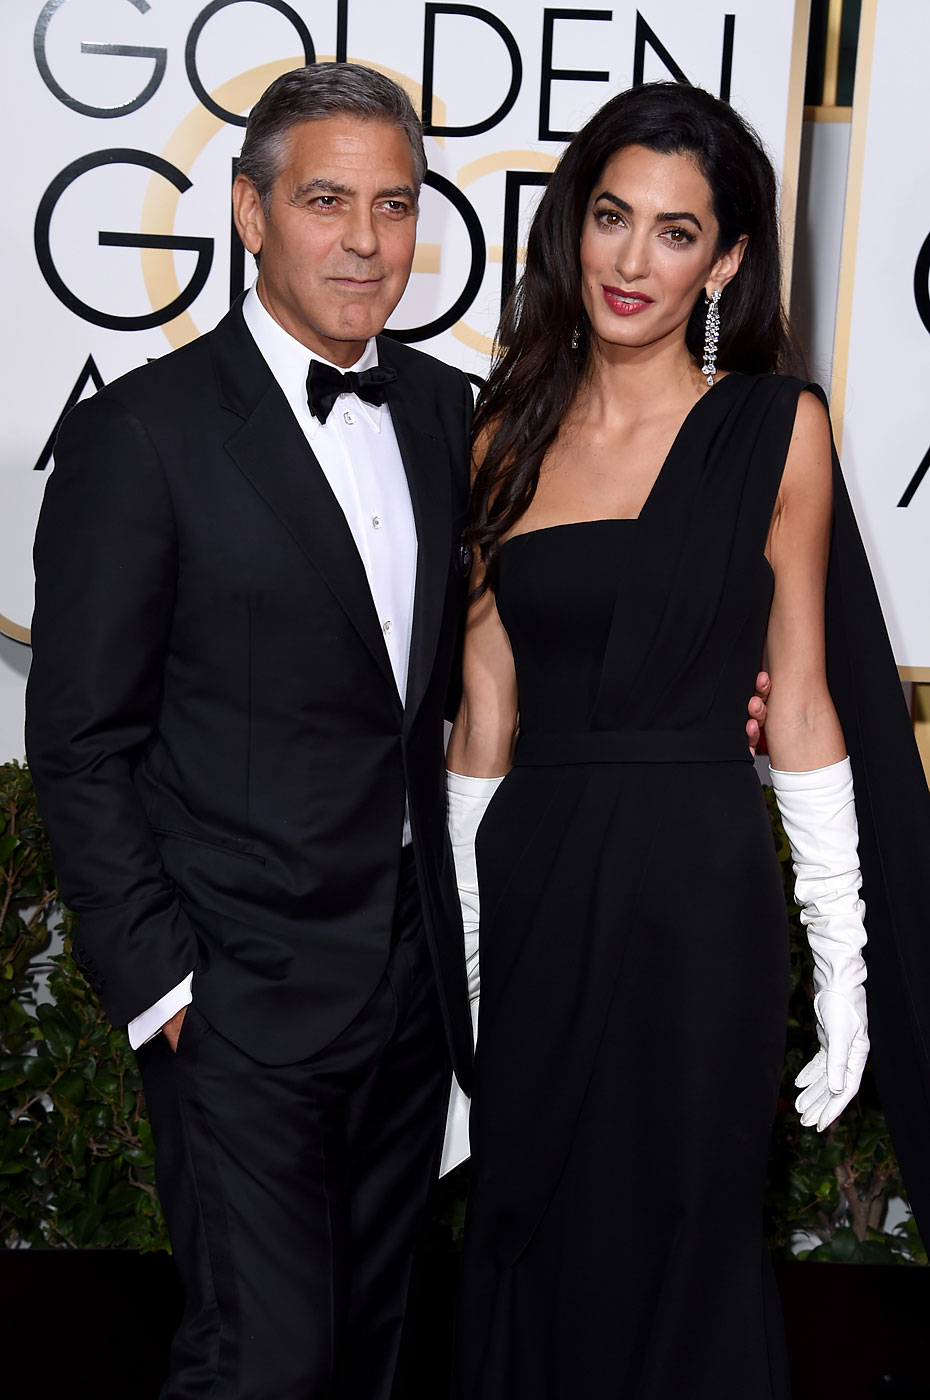 George Clooney and Amal Alamuddin Clooney attend the 72nd Annual Golden Globe Awards at The Beverly Hilton Hotel on Jan. 11, 2015 in Beverly Hills, Calif. (Steve Granitz—WireImage/Getty Images)